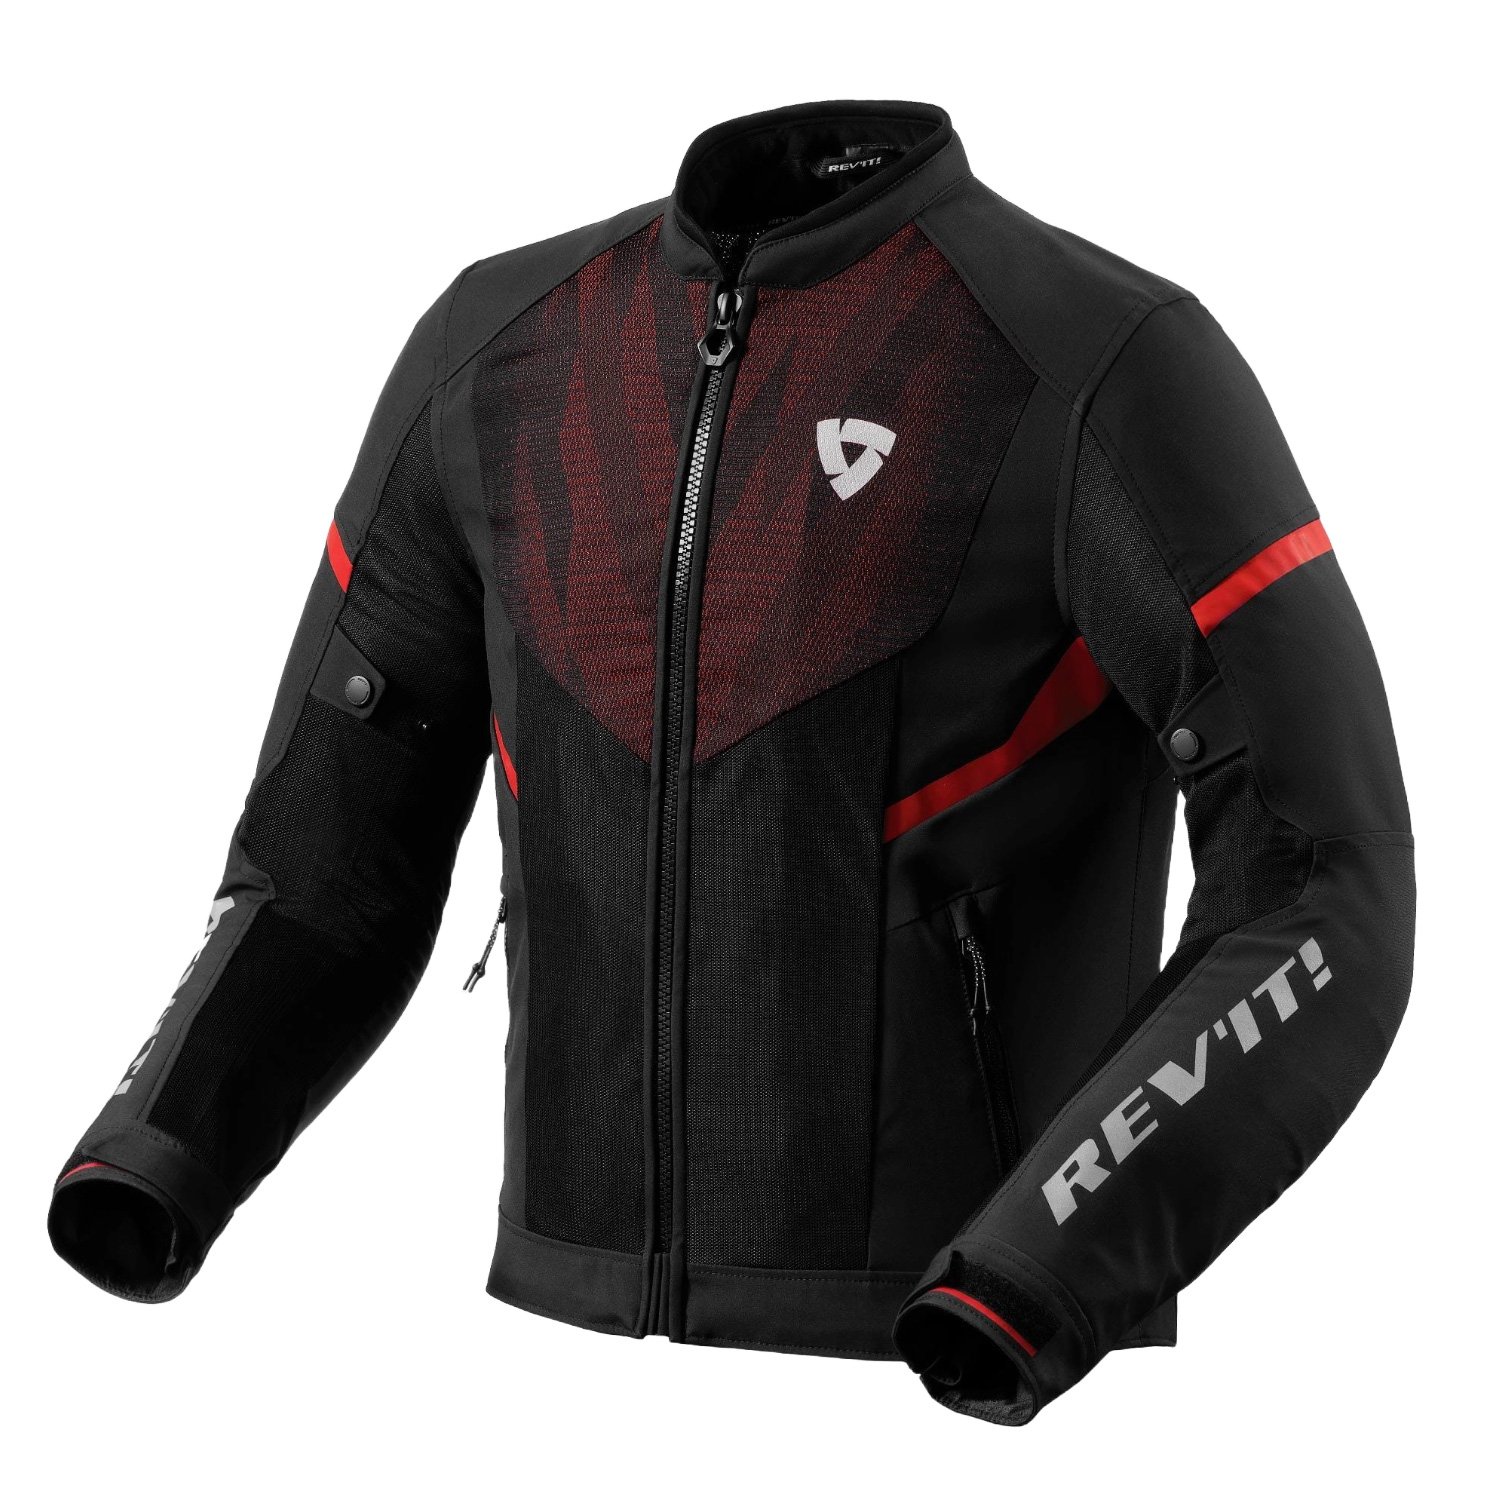 Image of REV'IT! Hyperspeed 2 GT Air Jacket Black Neon Red Size XL ID 8700001367493